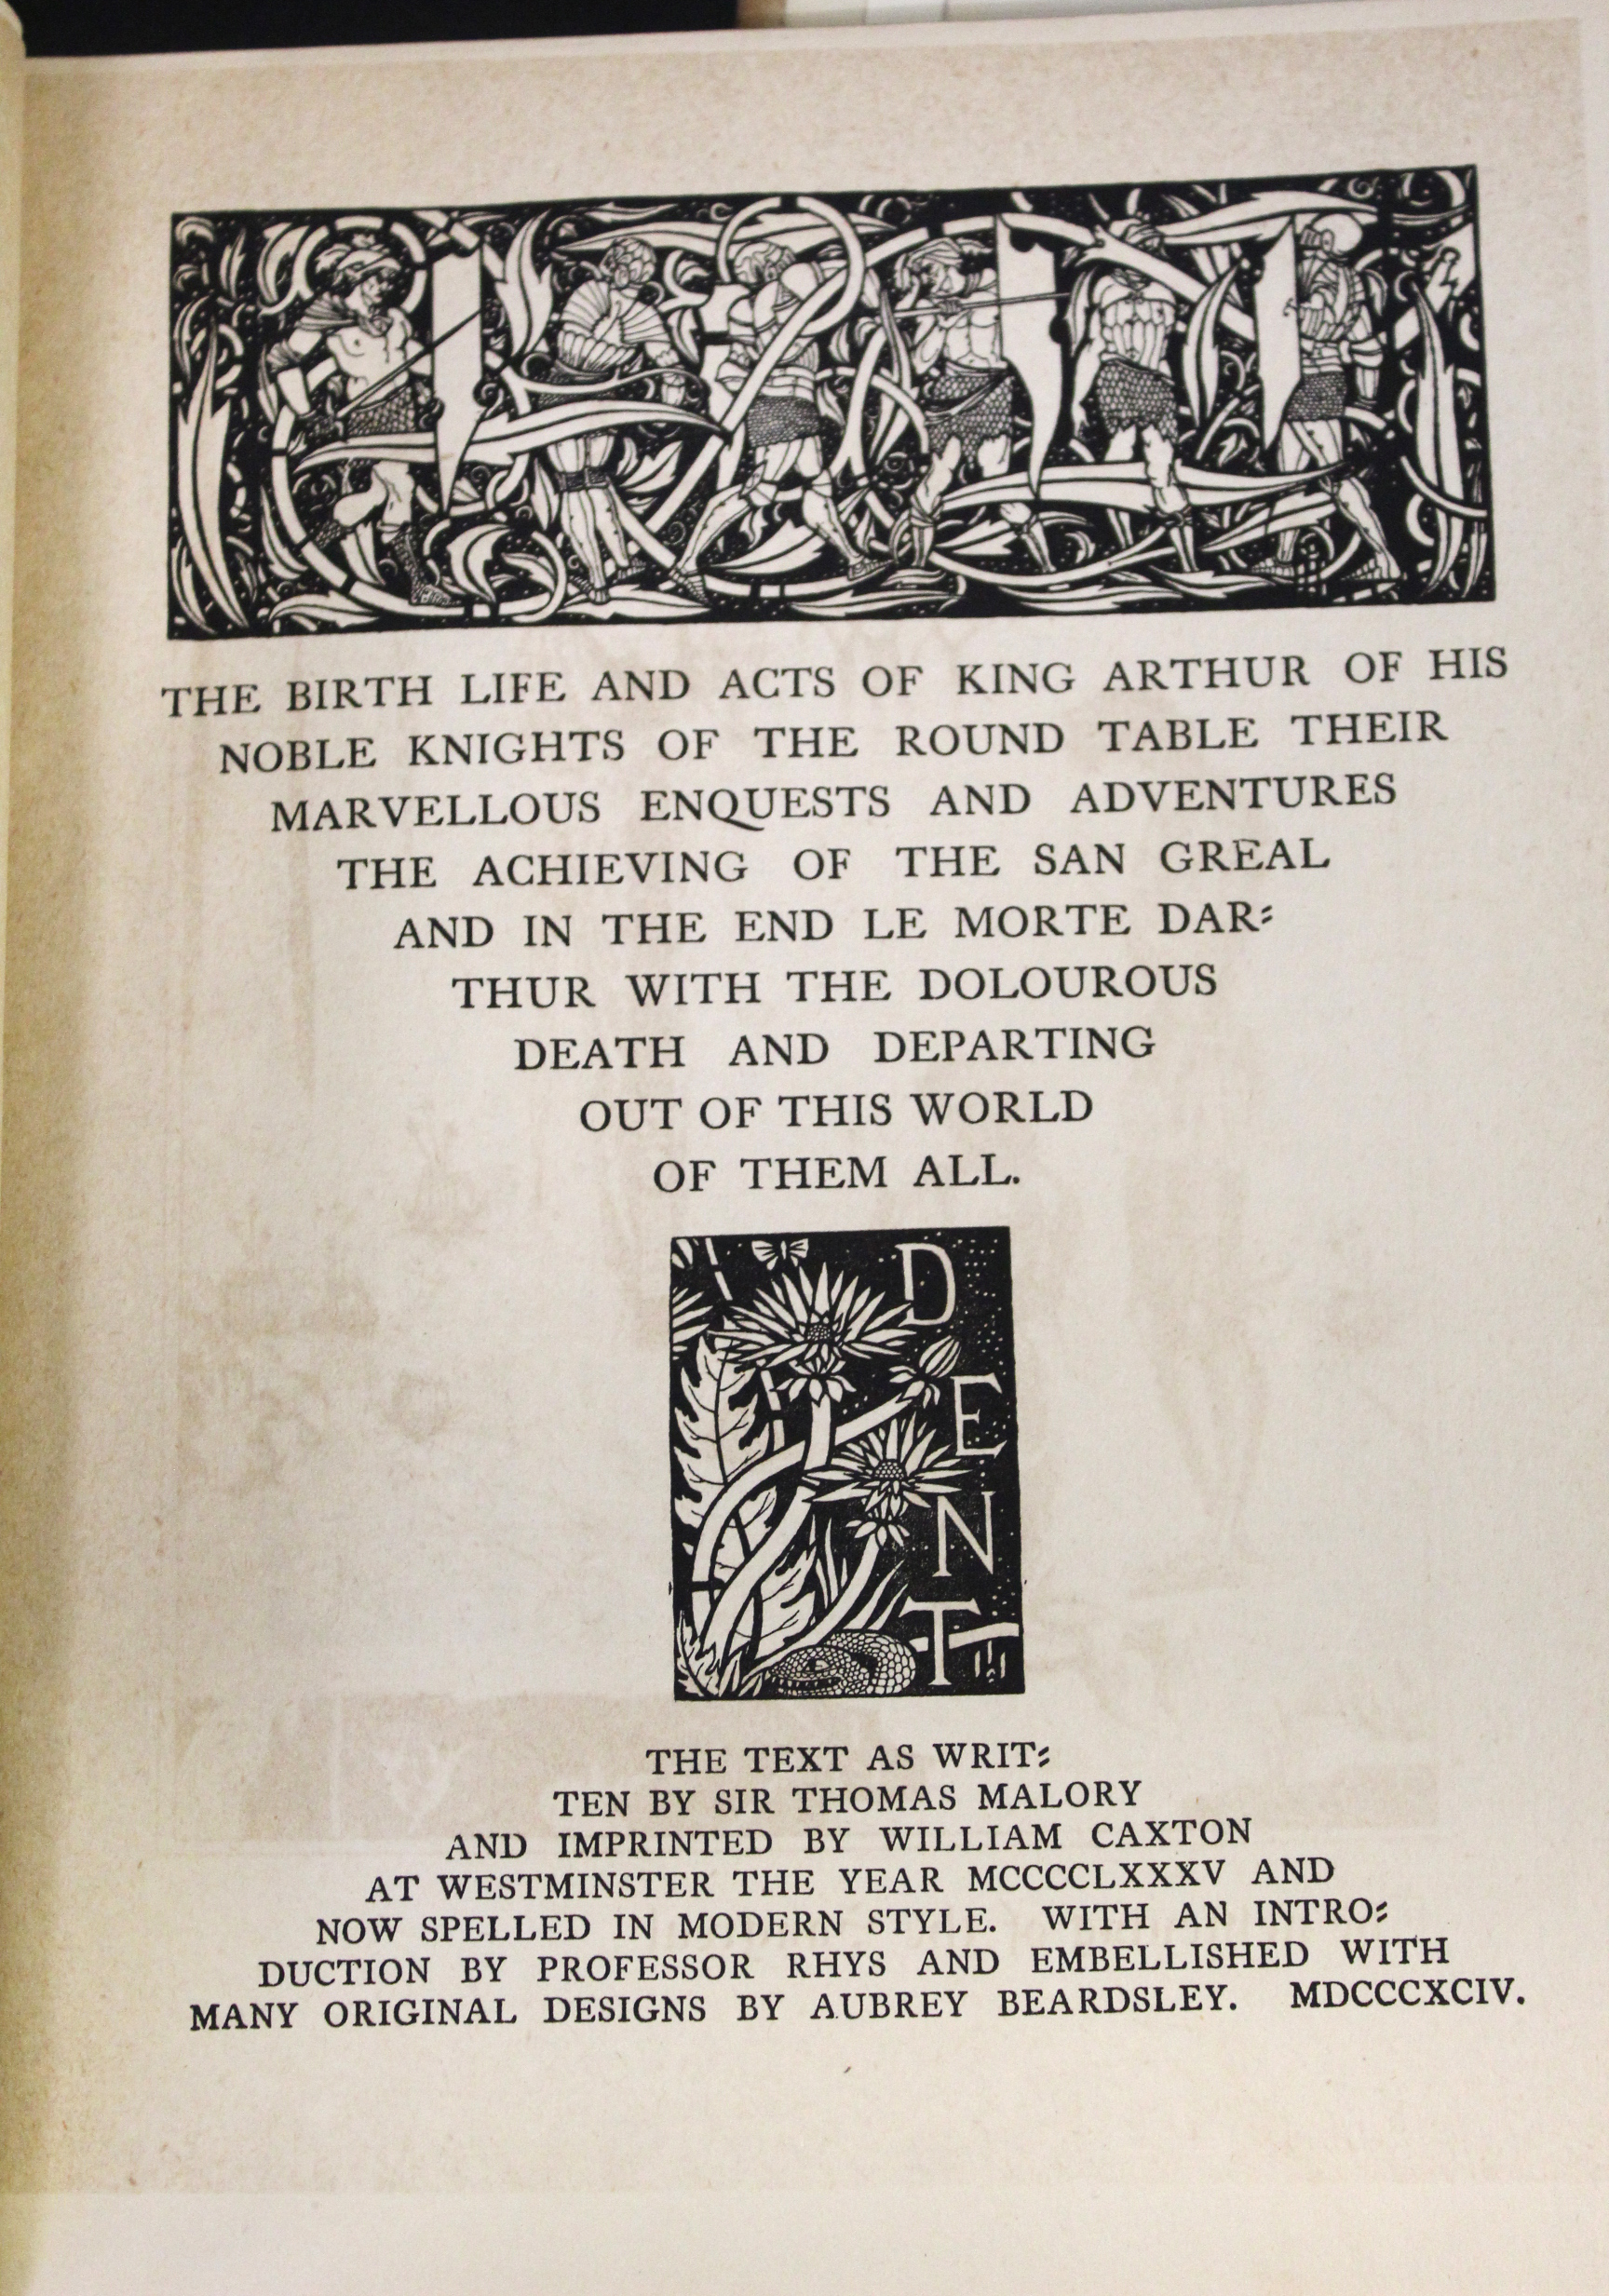 SIR THOMAS MALORY: LE MORTE D'ARTHUR, THE BIRTH LIFE AND ACTS OF KING ARTHUR OF HIS NOBLE KNIGHTS OF - Image 4 of 10